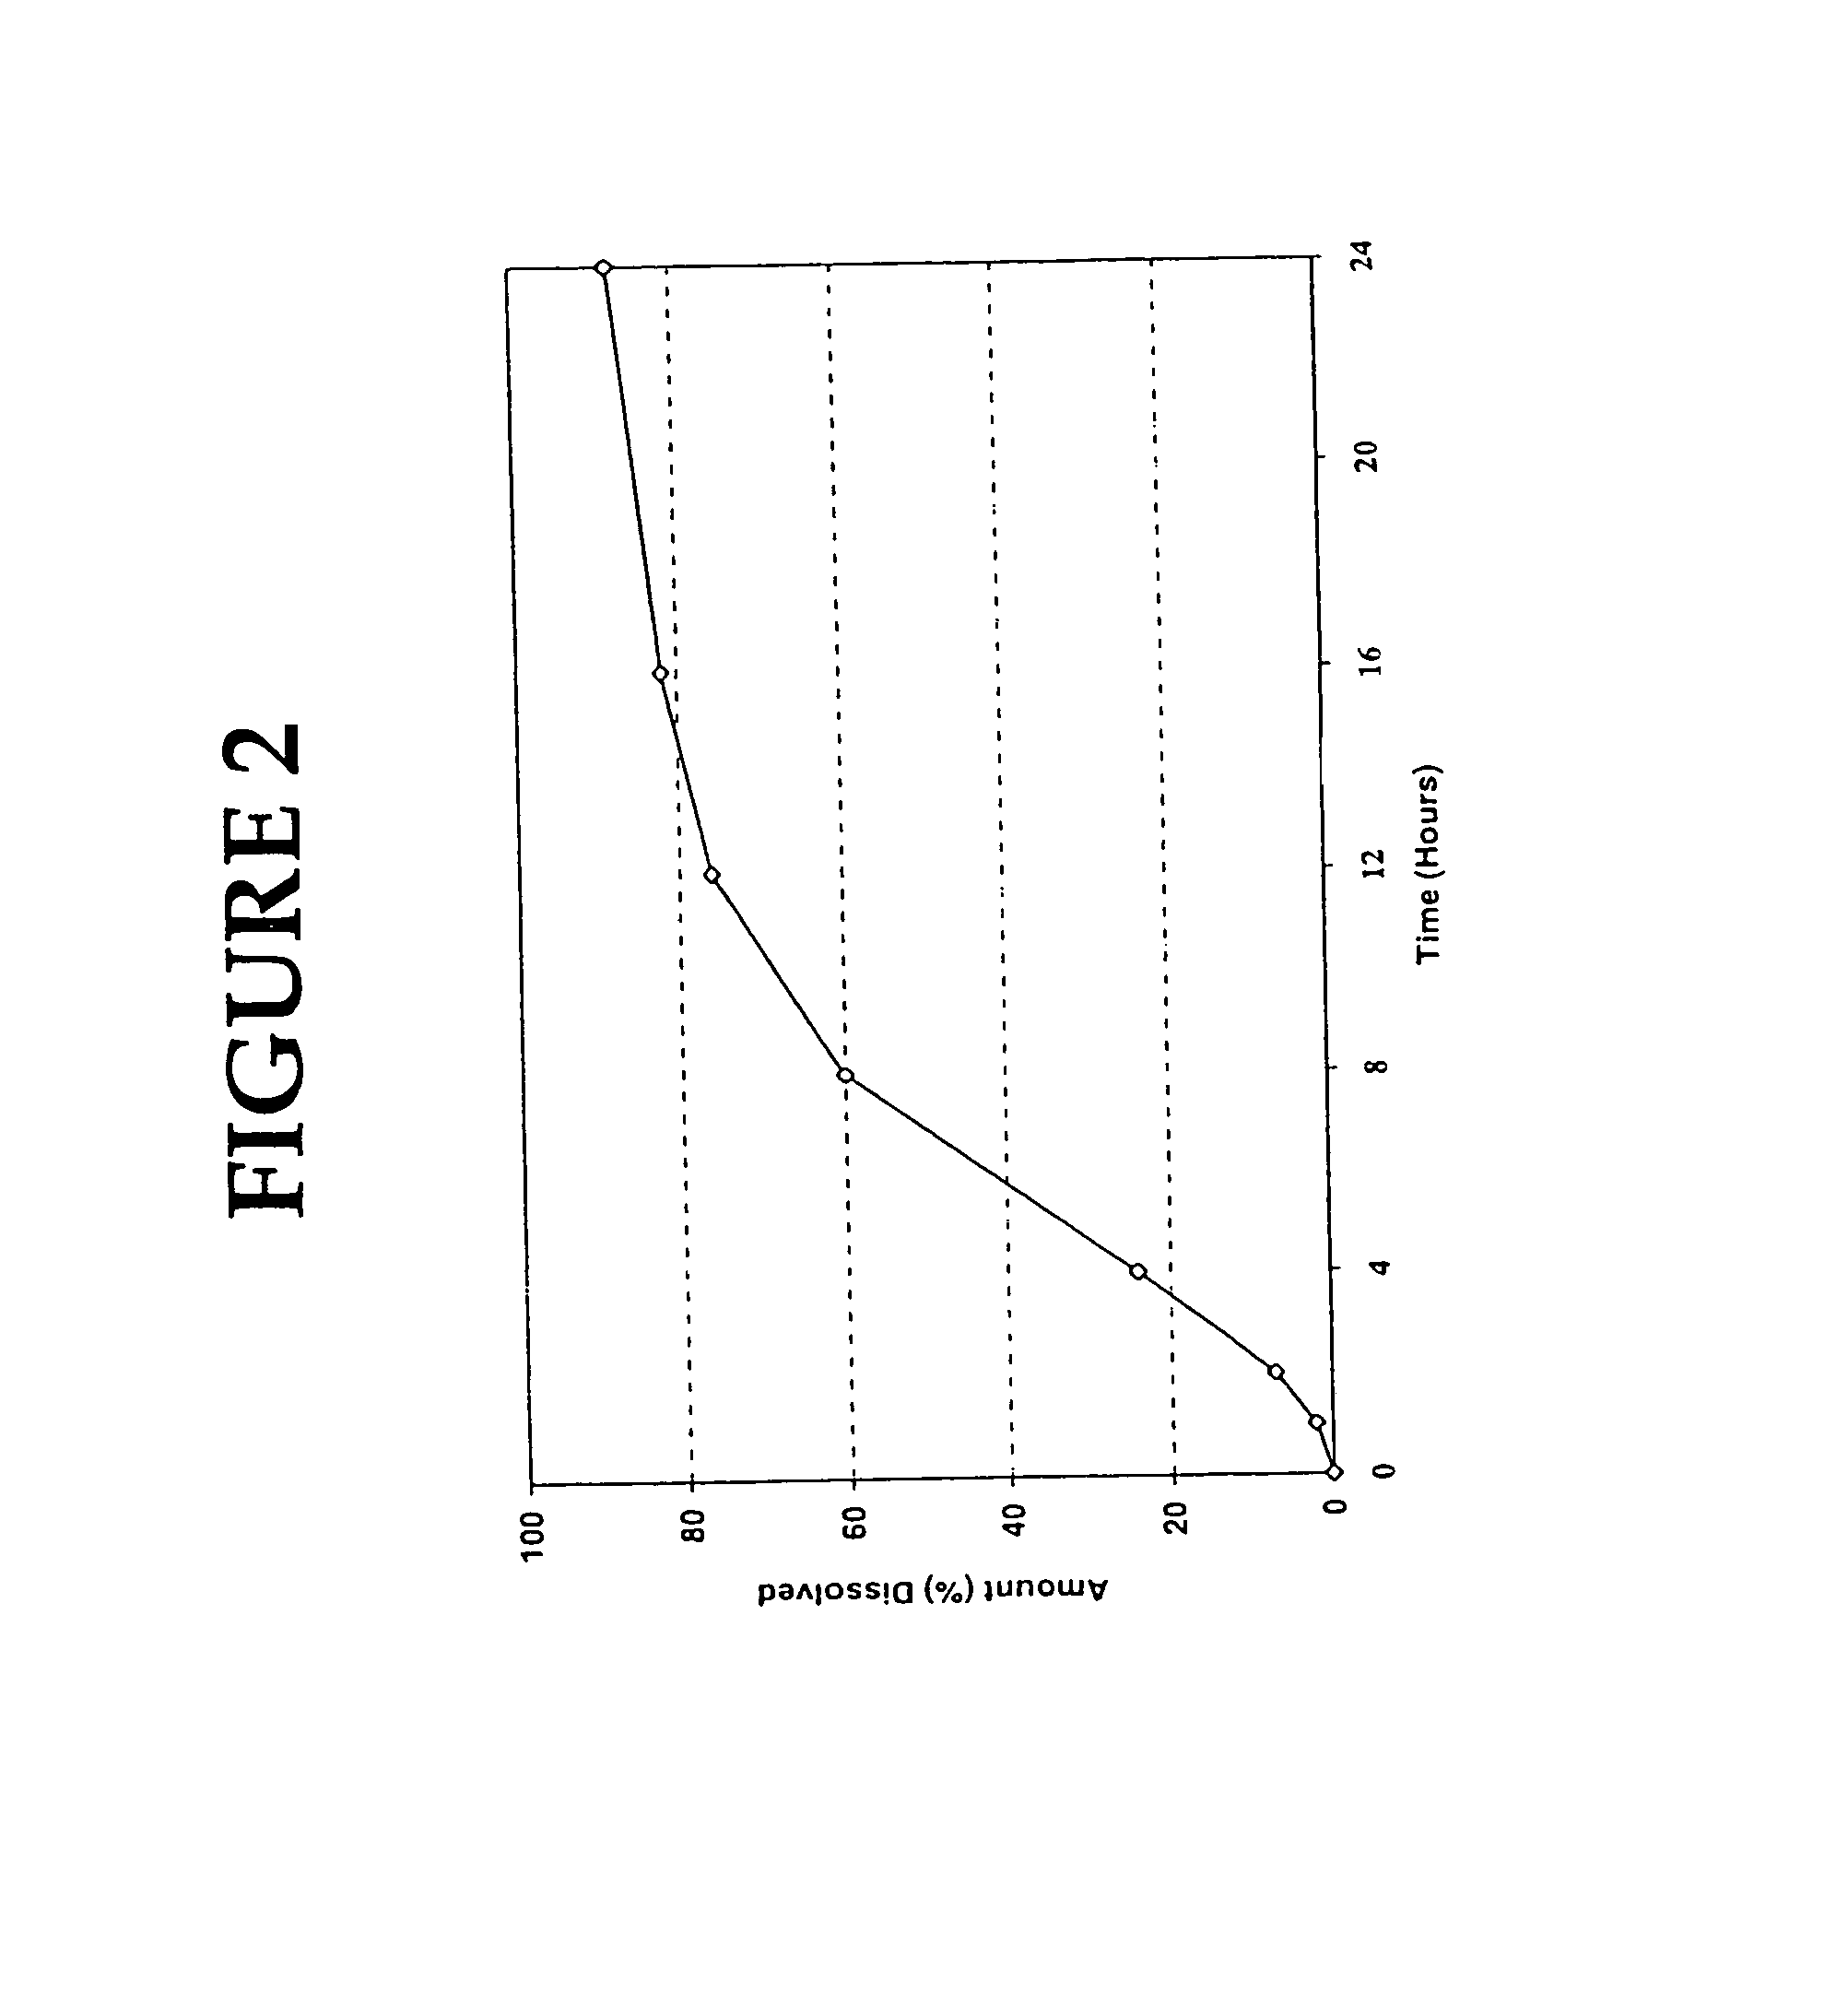 Diltiazem controlled release formulation and method of manufacture